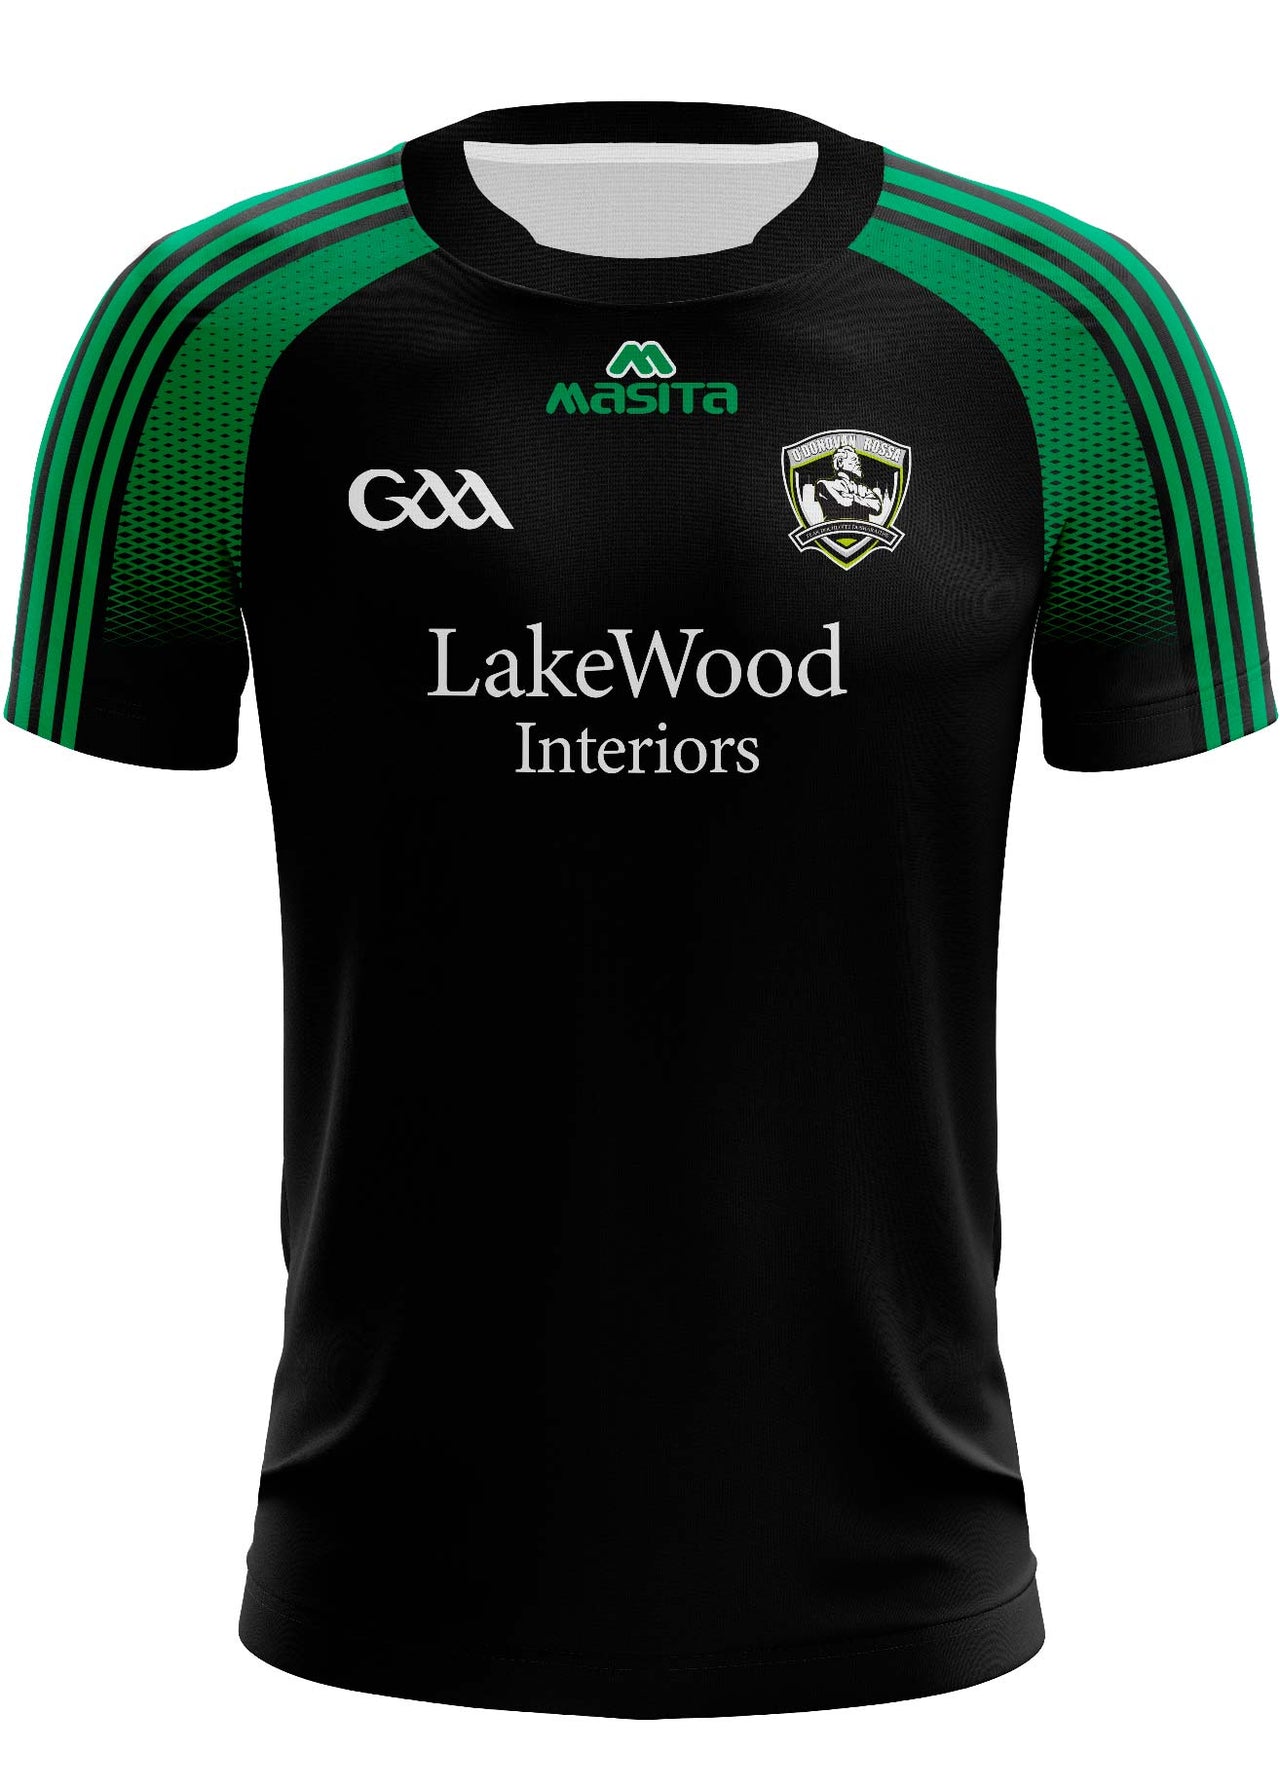 O'Donovan Rossa New York Home Jersey Player Fit Adult